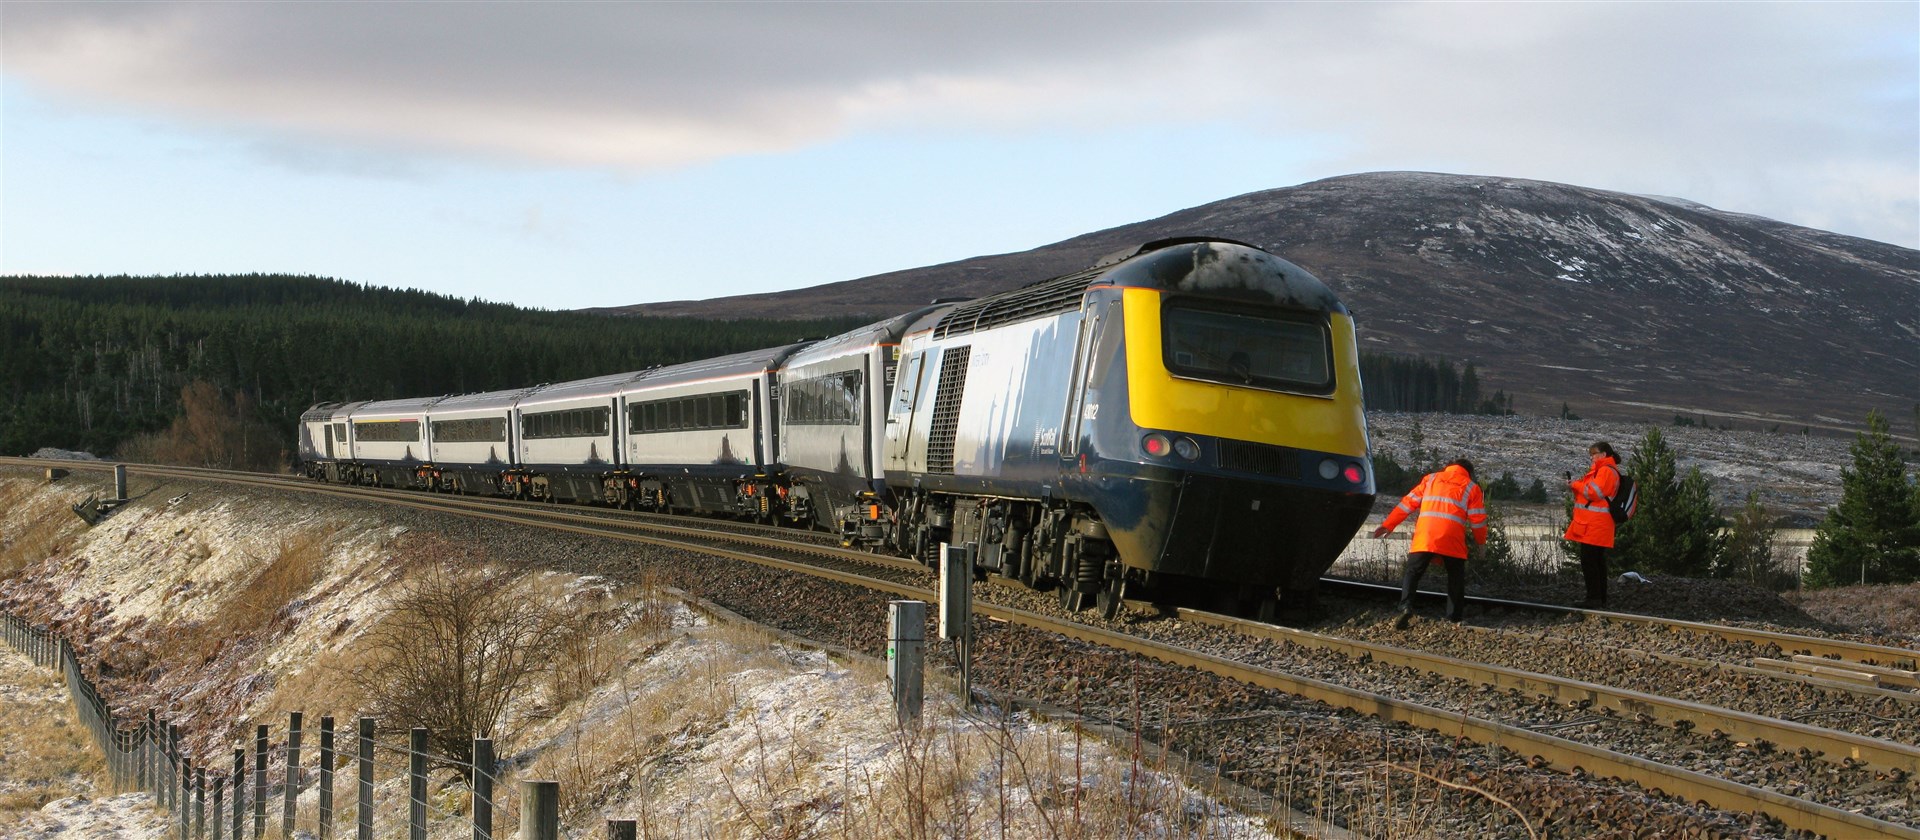 The RAIB has concluded that a signal wiring failure led to the derailment by Dalwhinnie.